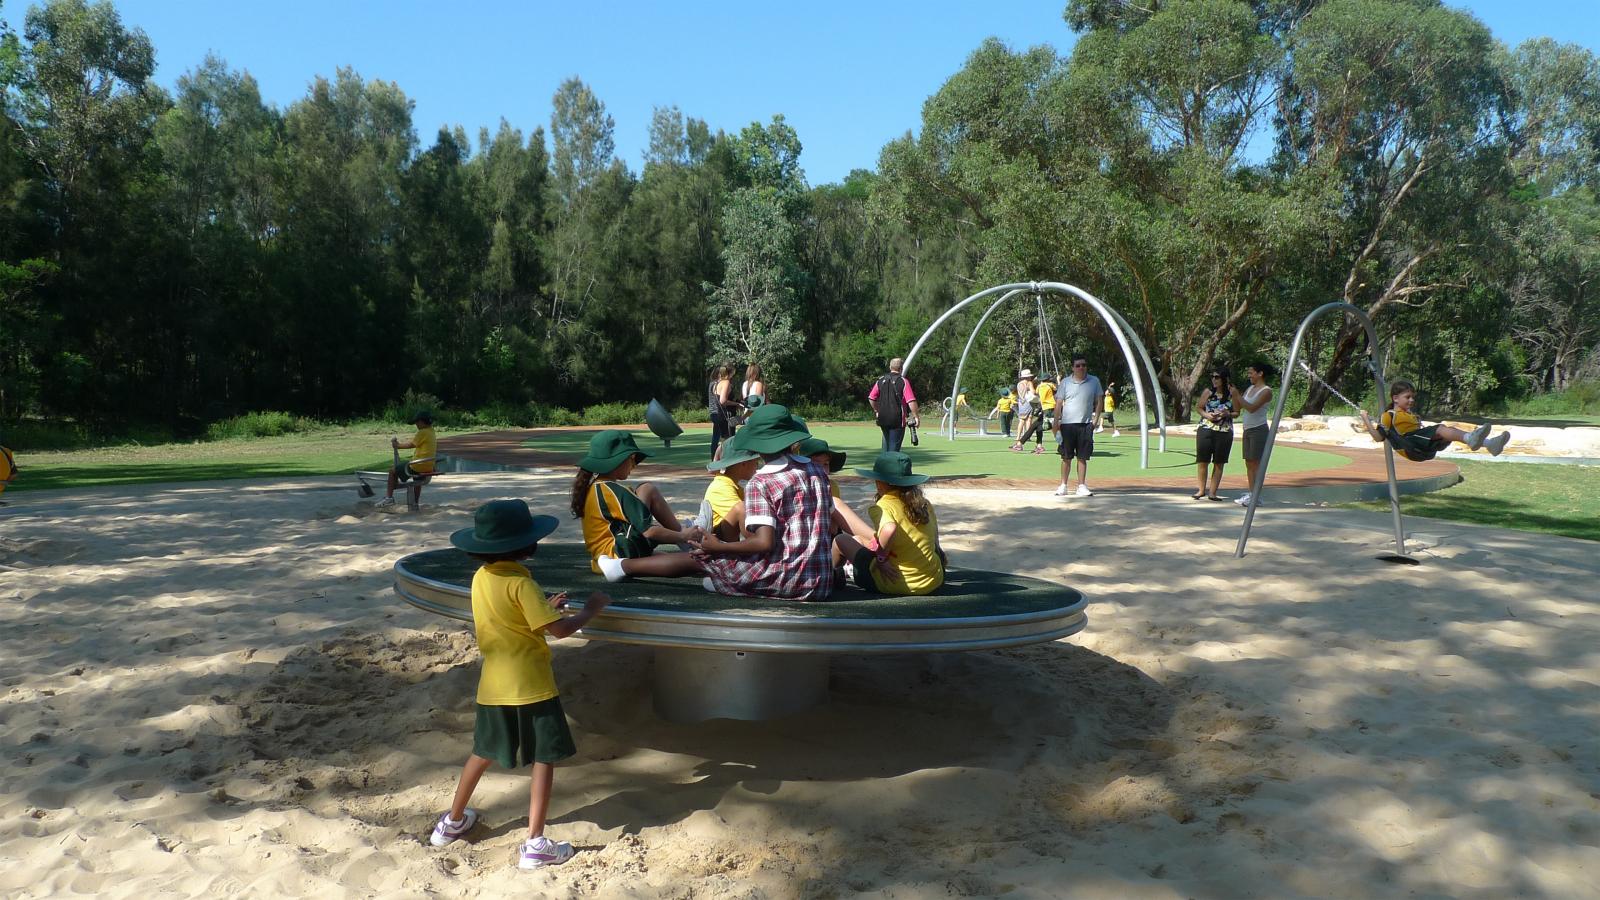 At Paddocks Precinct, a group of children in green hats and uniforms play on a round spinning playground equipment in a sandy area surrounded by trees. Other children and adults are scattered across the playground, enjoying various activities in the background.